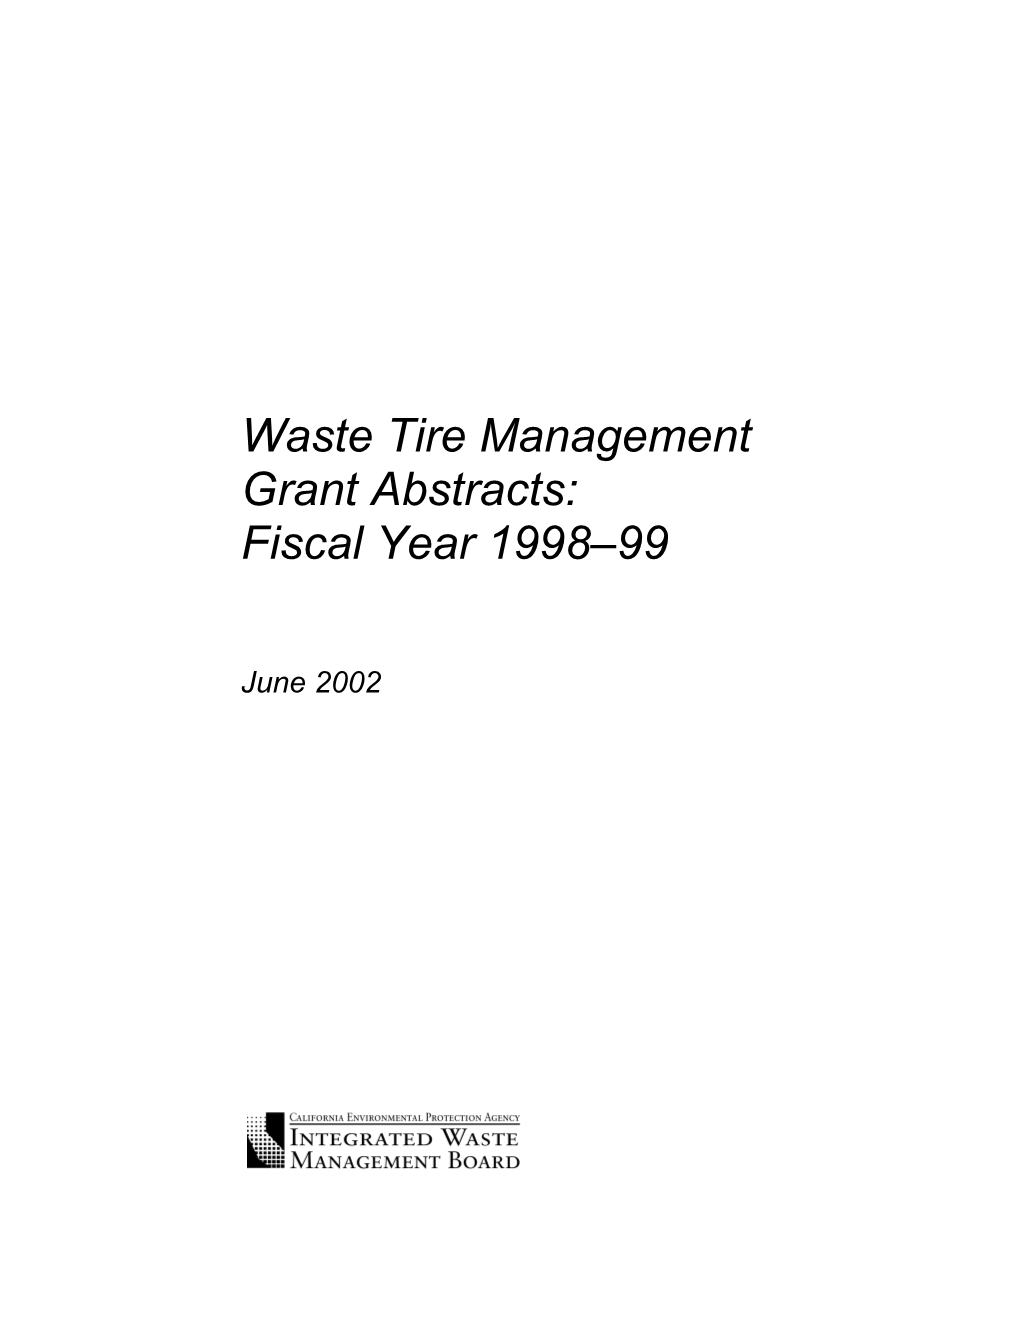 Waste Tire Management Grant Abstracts: Fiscal Year 1998-99